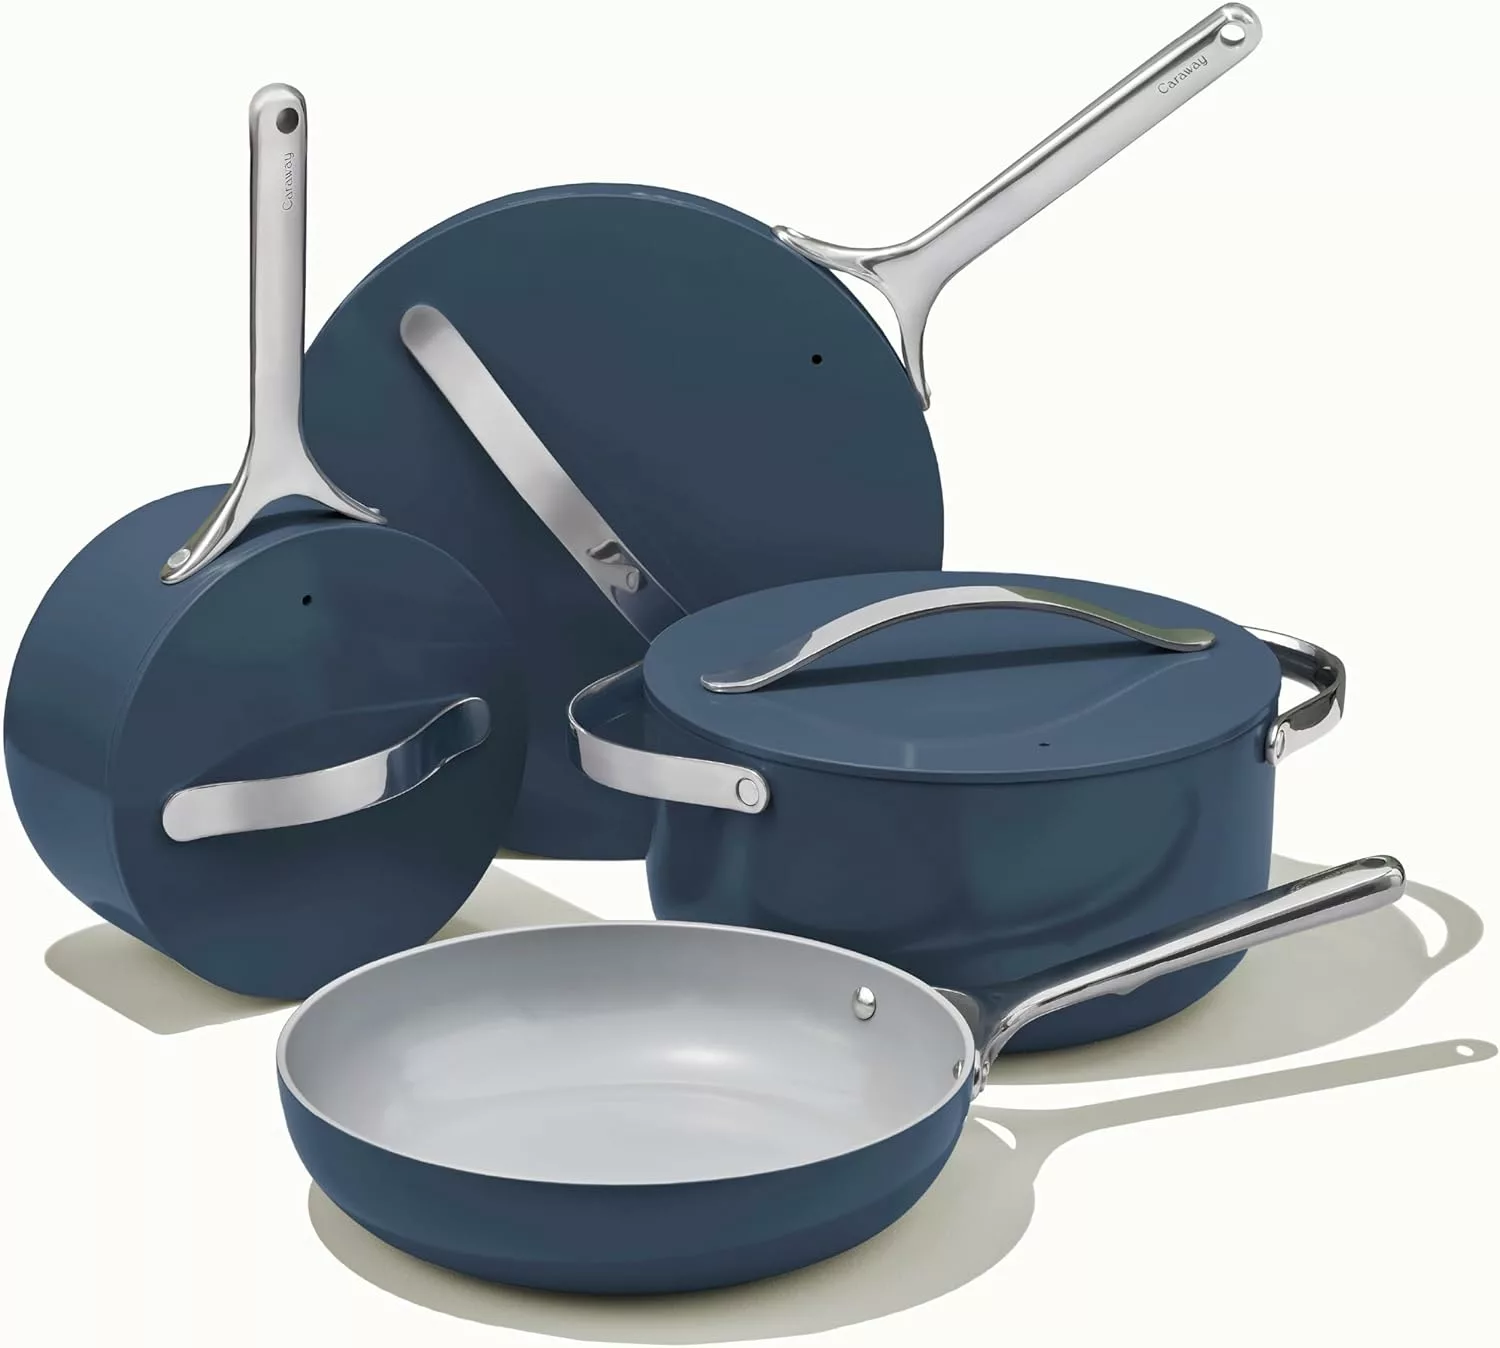 Top 10 Non-Toxic Cookware Sets in 2023